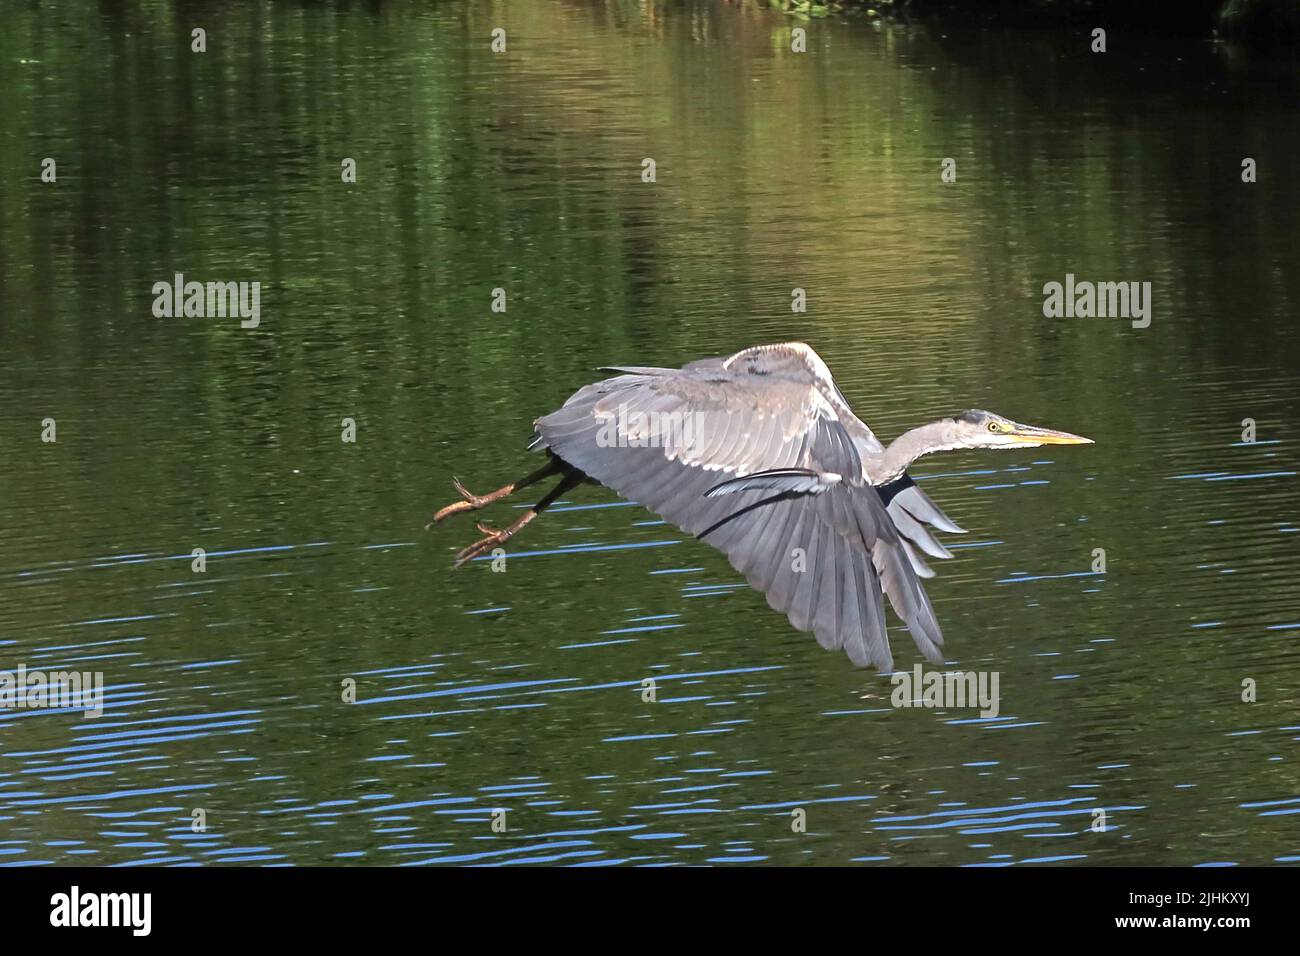 Flying Heron wildlife on the bank of the Bridgewater Canal, Grappenhall/Thelwall,Warrington, Cheshire, England, UK, WA4 2TB Stock Photo